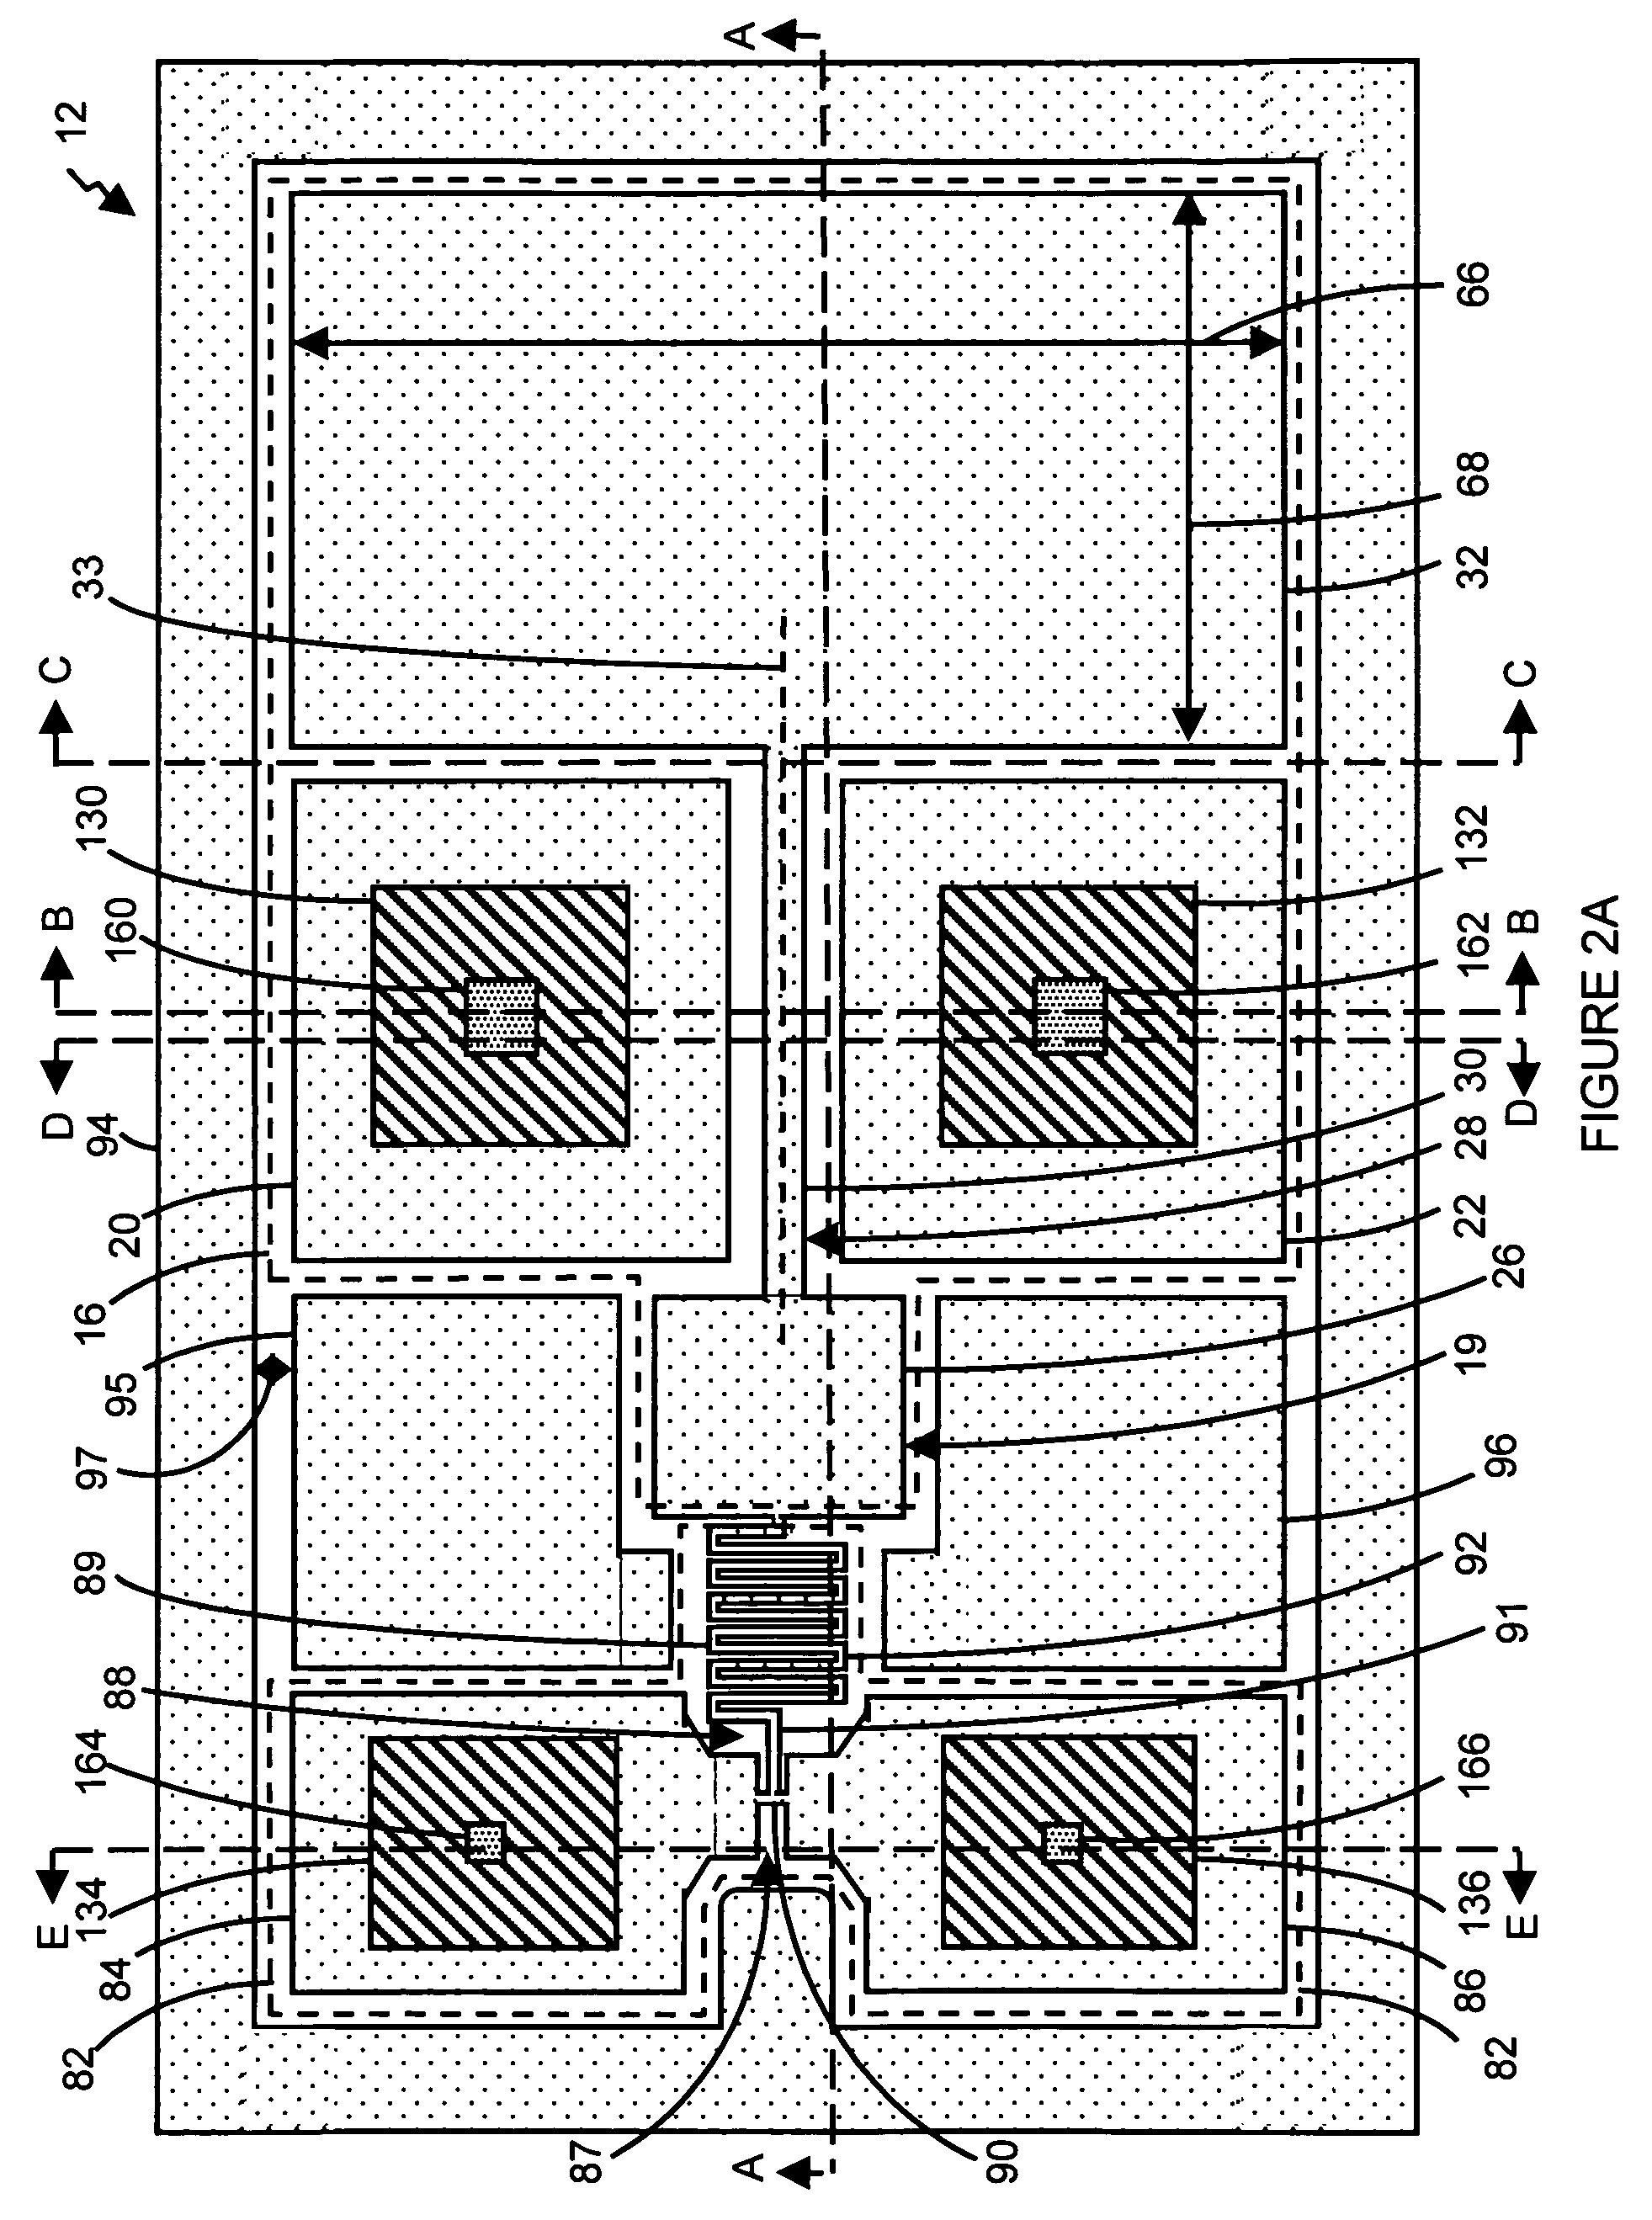 Microelectromechanical systems having stored charge and methods for fabricating and using same